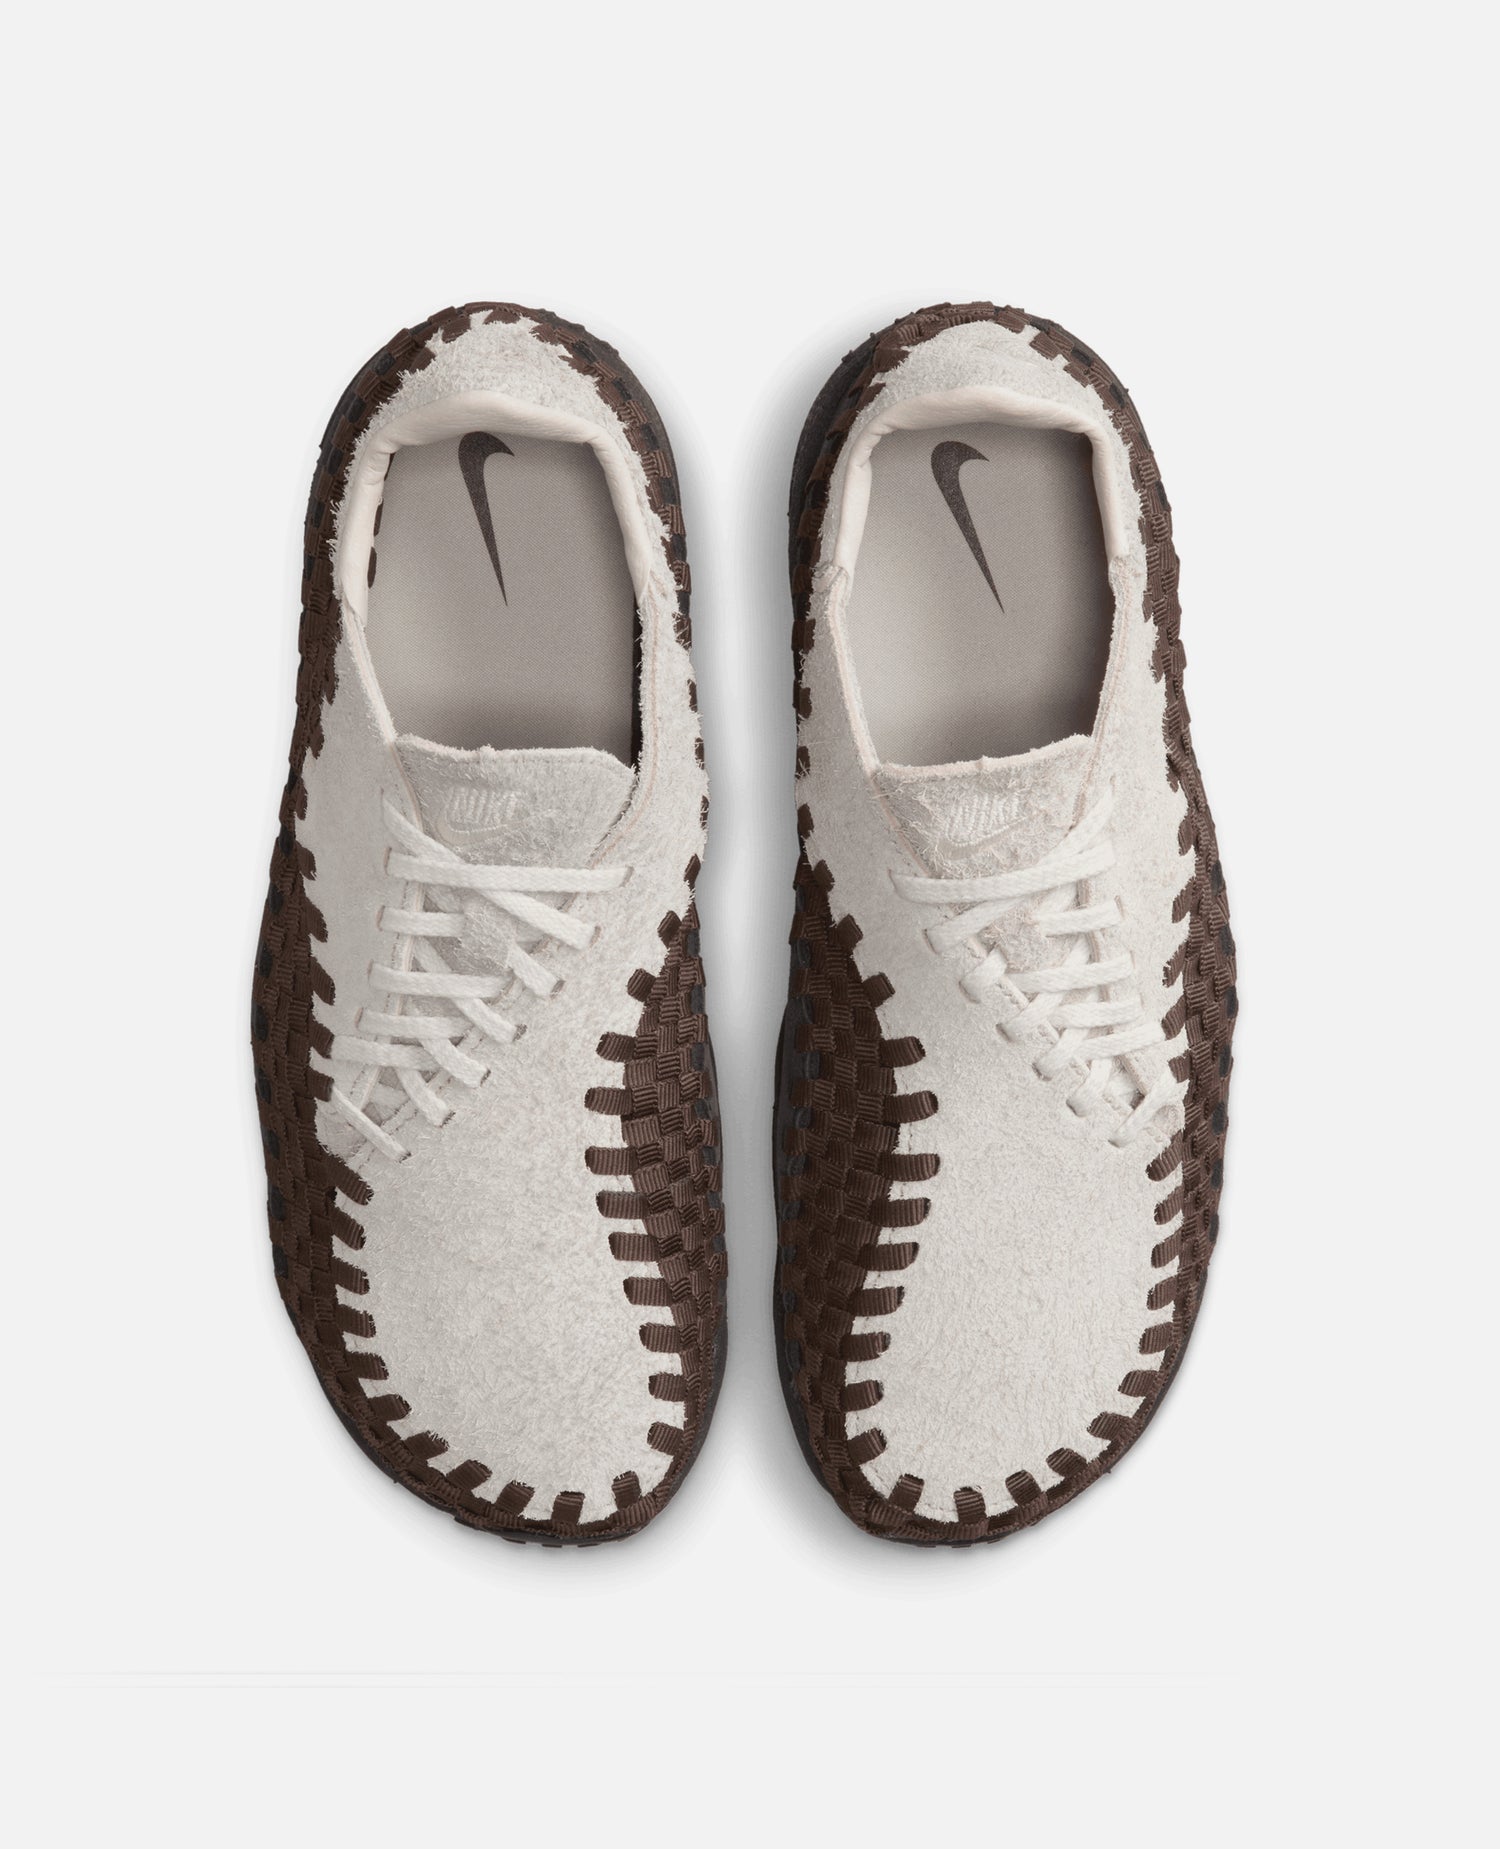 Nike Air Footscape Woven (Lt Orewood Brown/Coconut Milk)